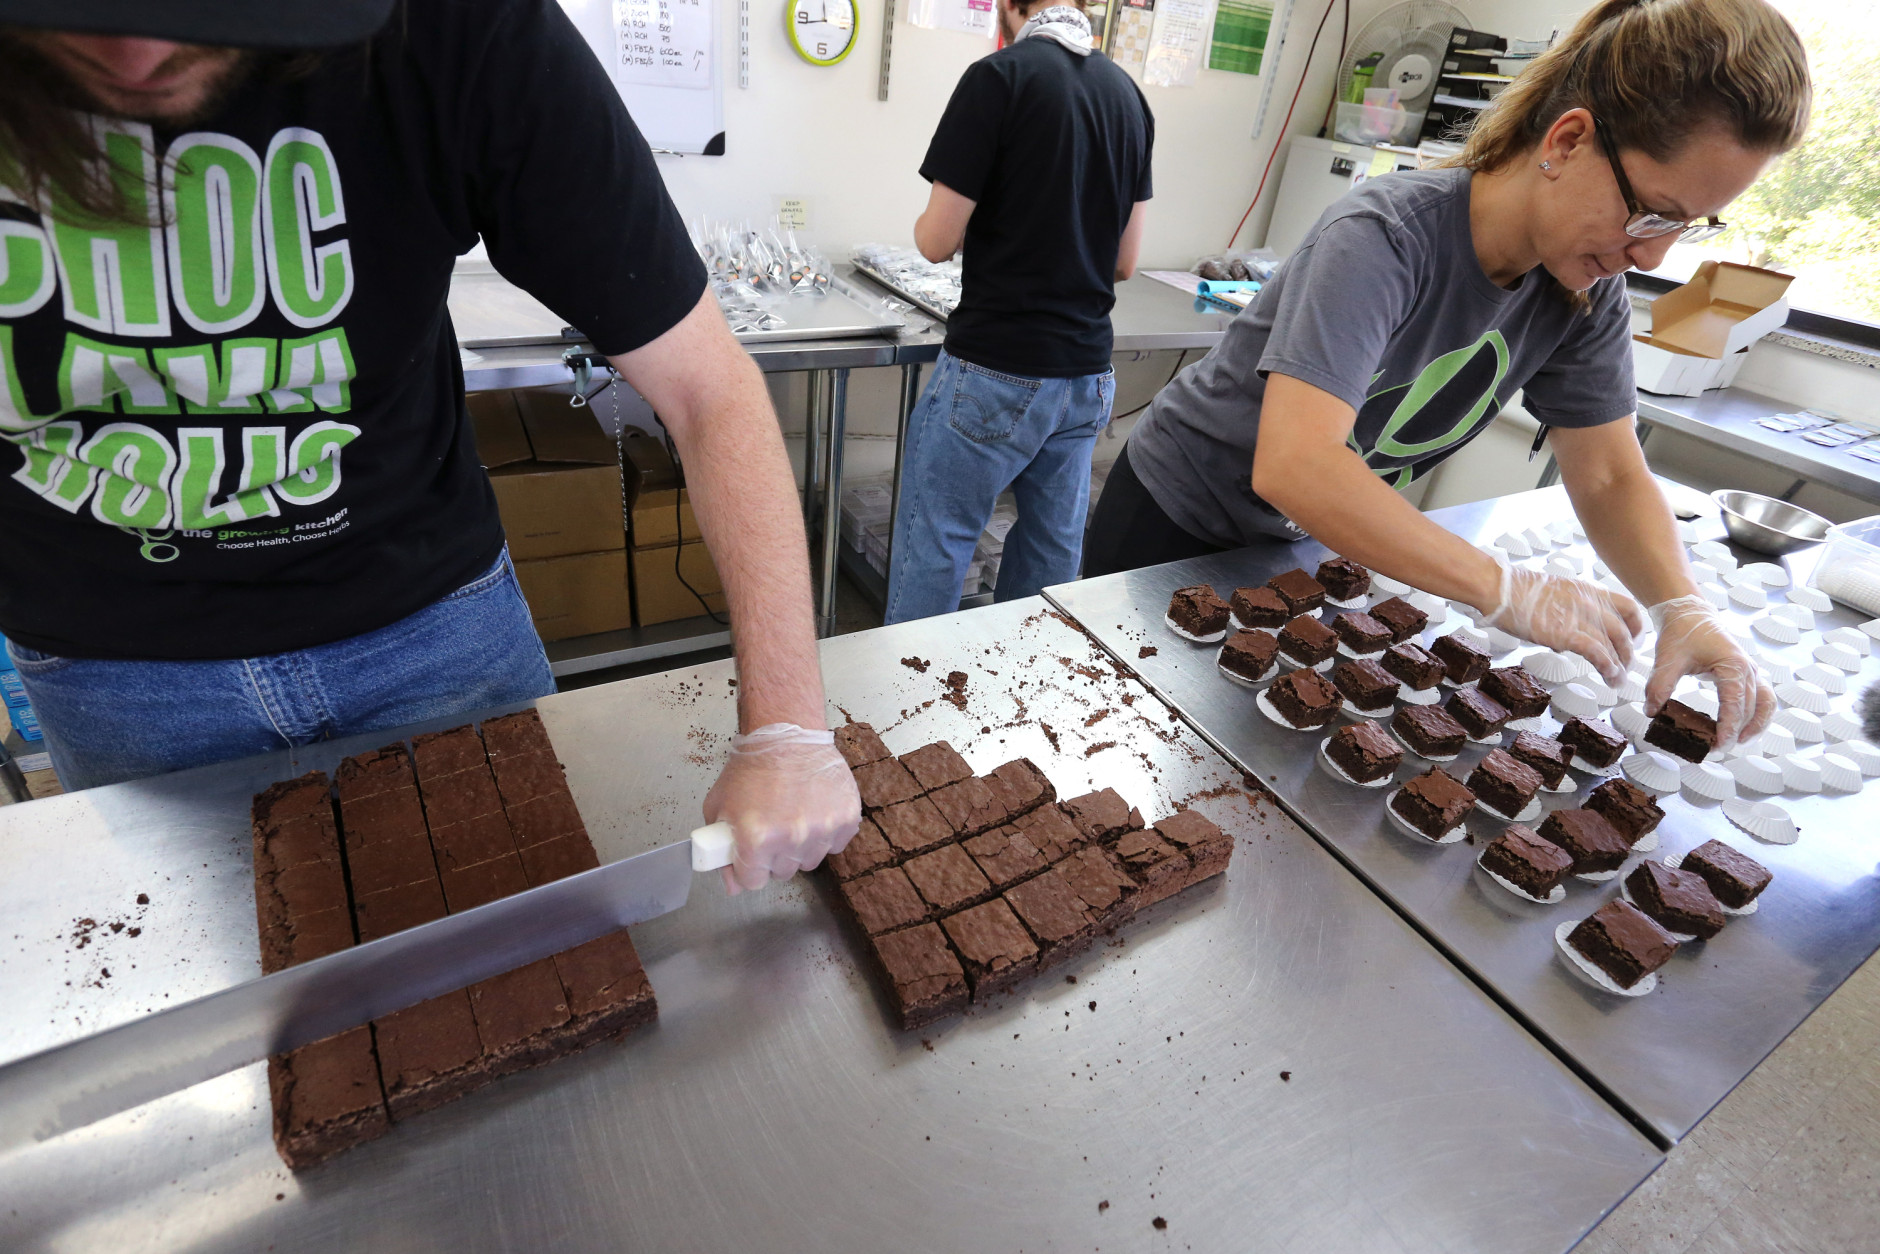 FILE - In this Sept. 26, 2014 file photo, smaller-dose pot-infused brownies are divided and packaged at The Growing Kitchen, in Boulder, Colo. Colorado health officials want to ban many edible forms of marijuana, including brownies, cookies and most candies, limiting sales of pot-infused food to lozenges and some liquids.(AP Photo/Brennan Linsley,File)